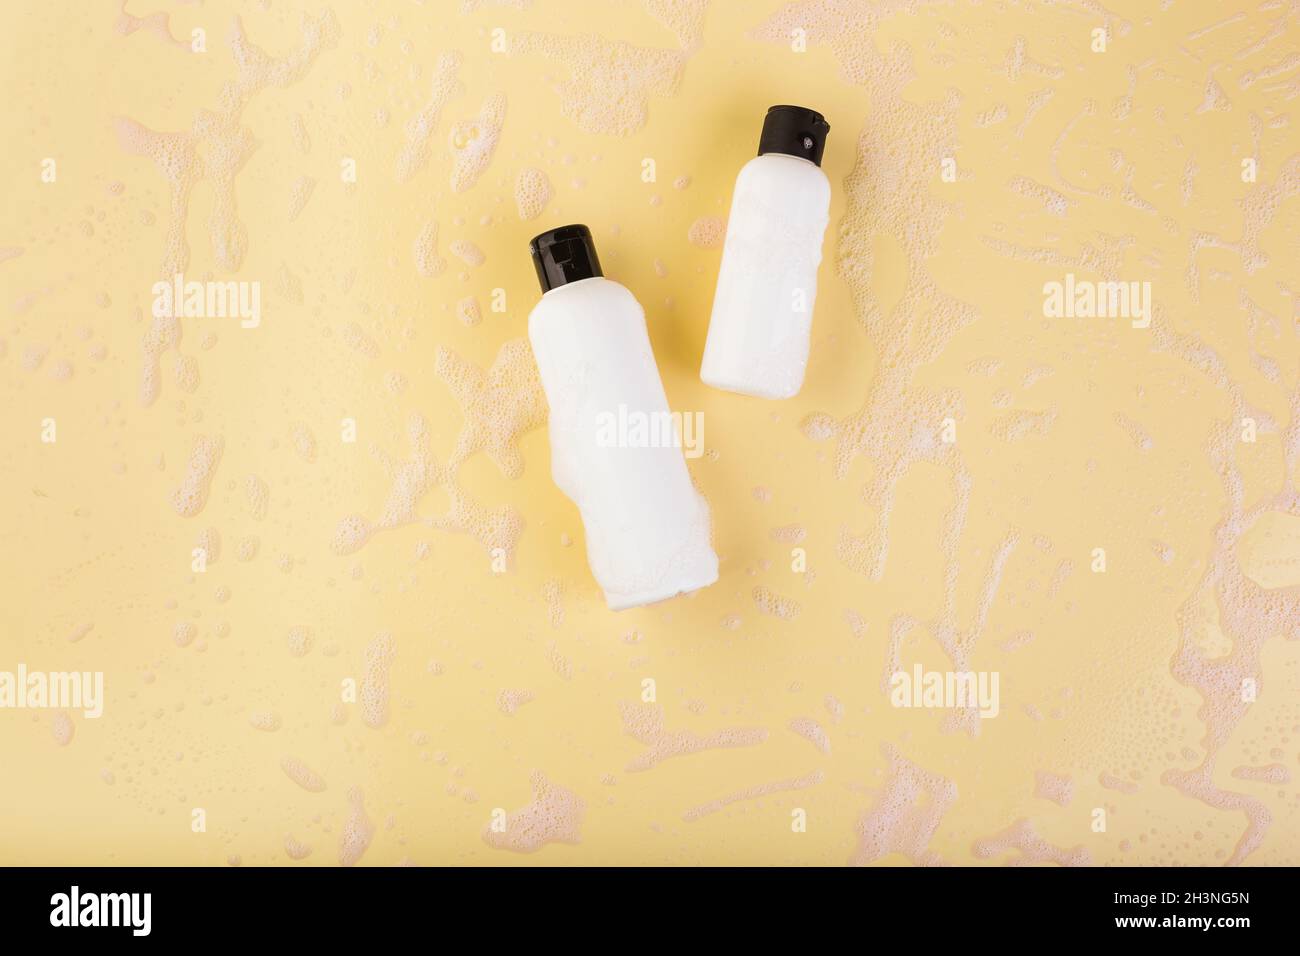 Two plastic bottles of different size on light yellow. No label. Close up, top view, copy space for text or logo. Stock Photo